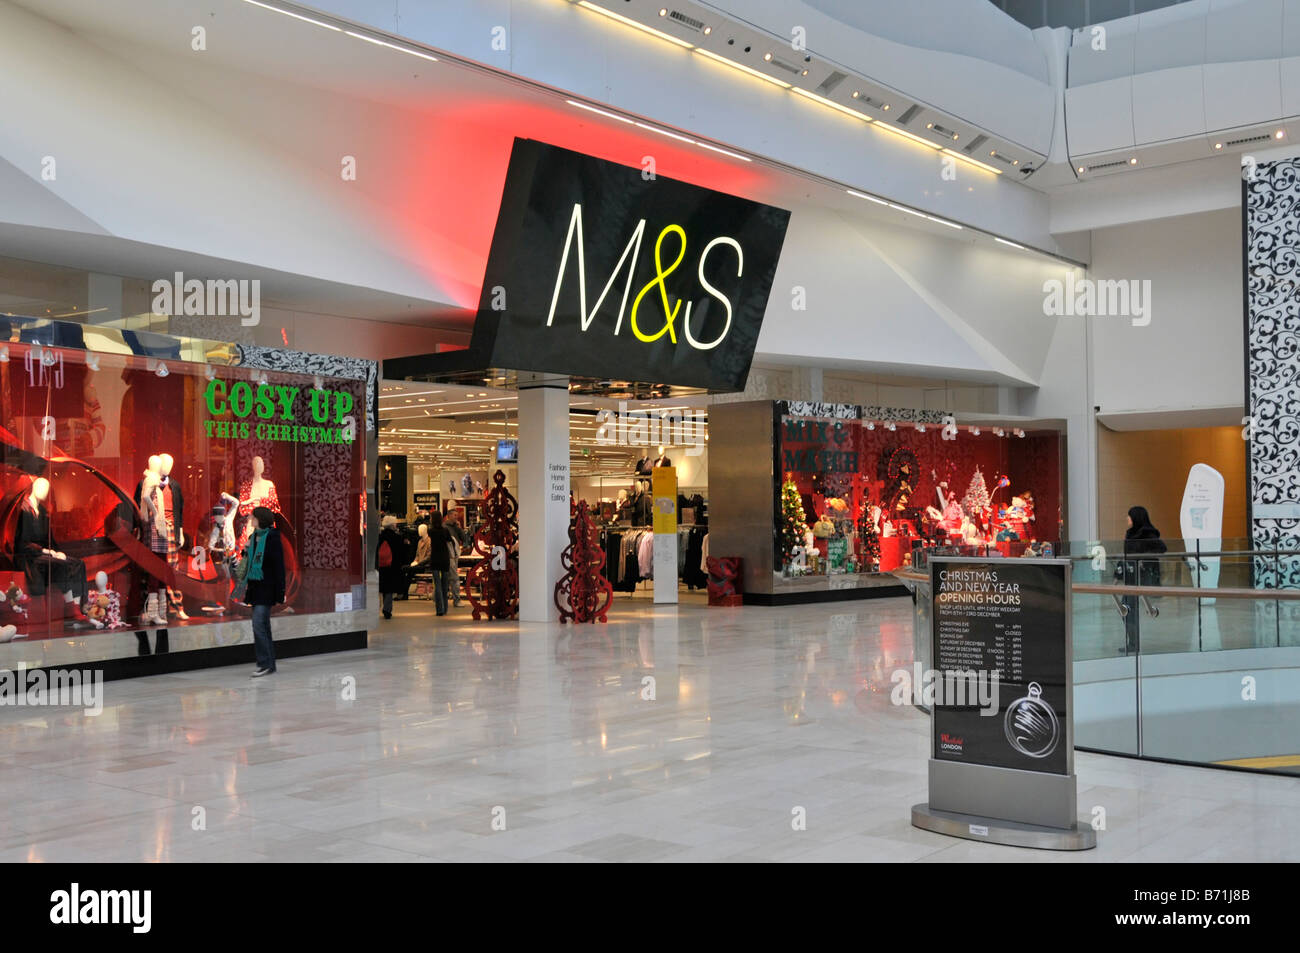 Marks and Spencer retail store window & red back lit M&S sign above entrance in Westfield shopping centre Shepherds Bush White City London England UK Stock Photo